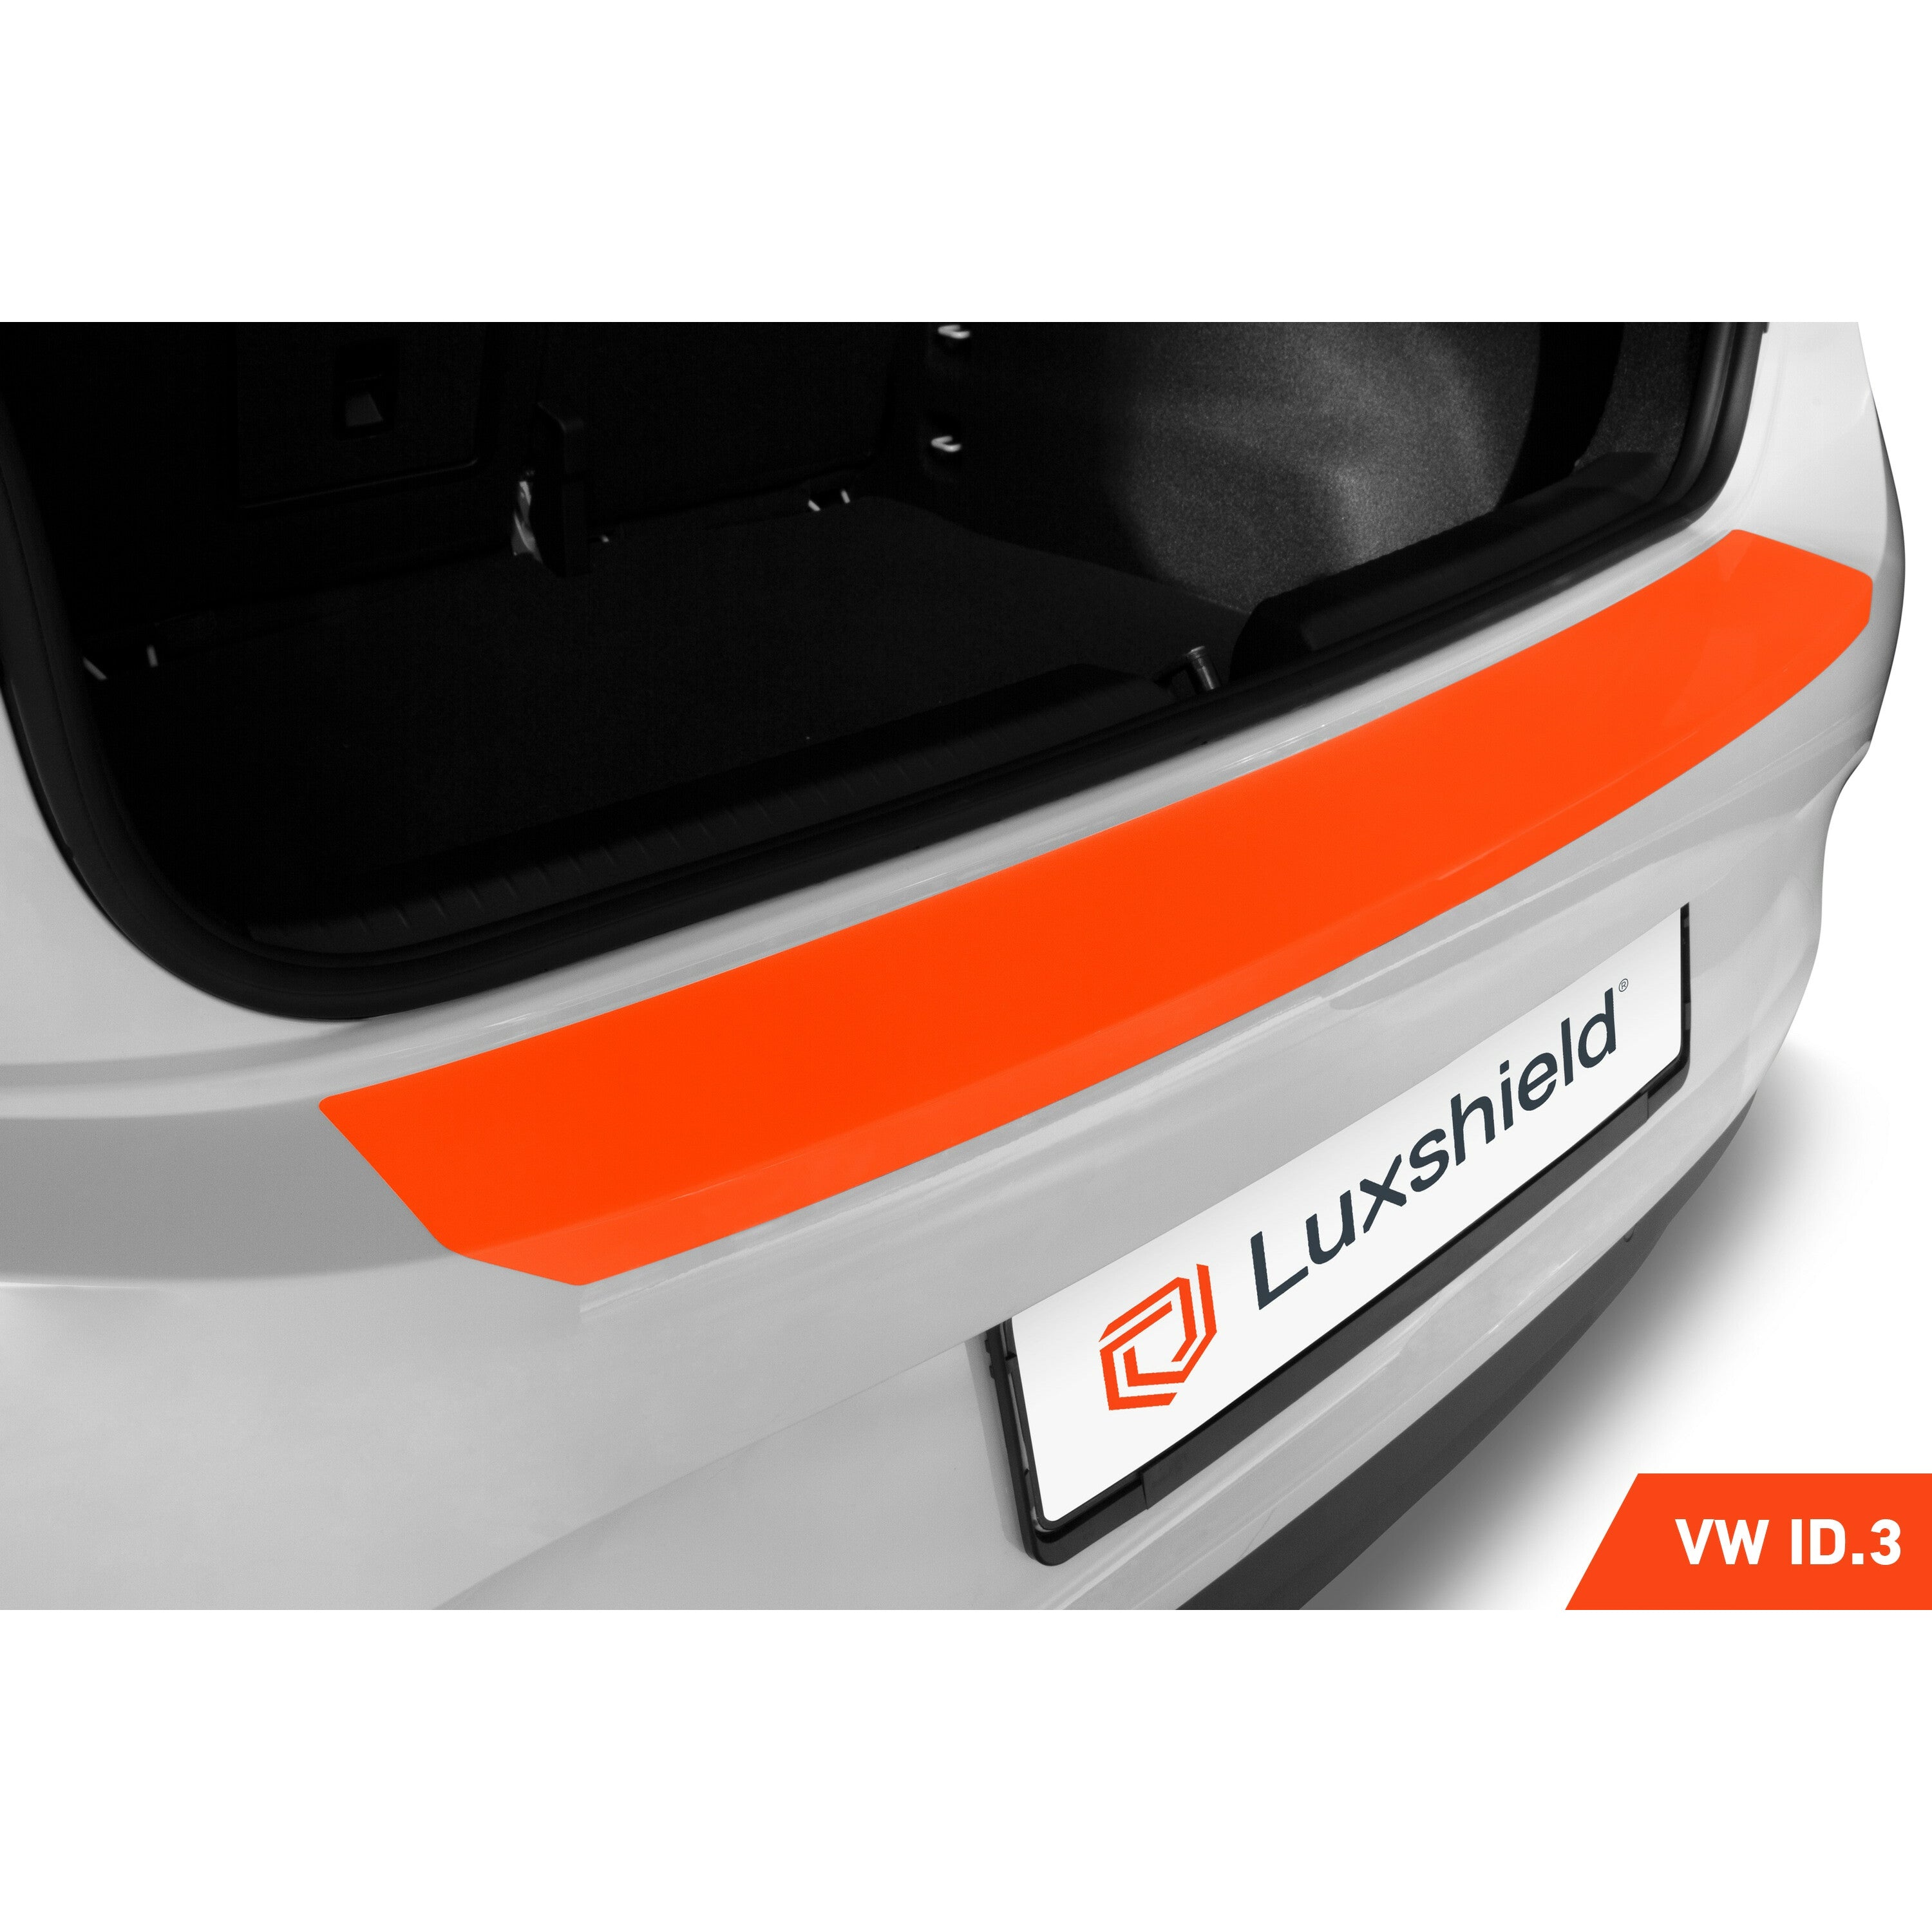 Luxshield Door Sill Protection Film for Vehicle, Protective Film